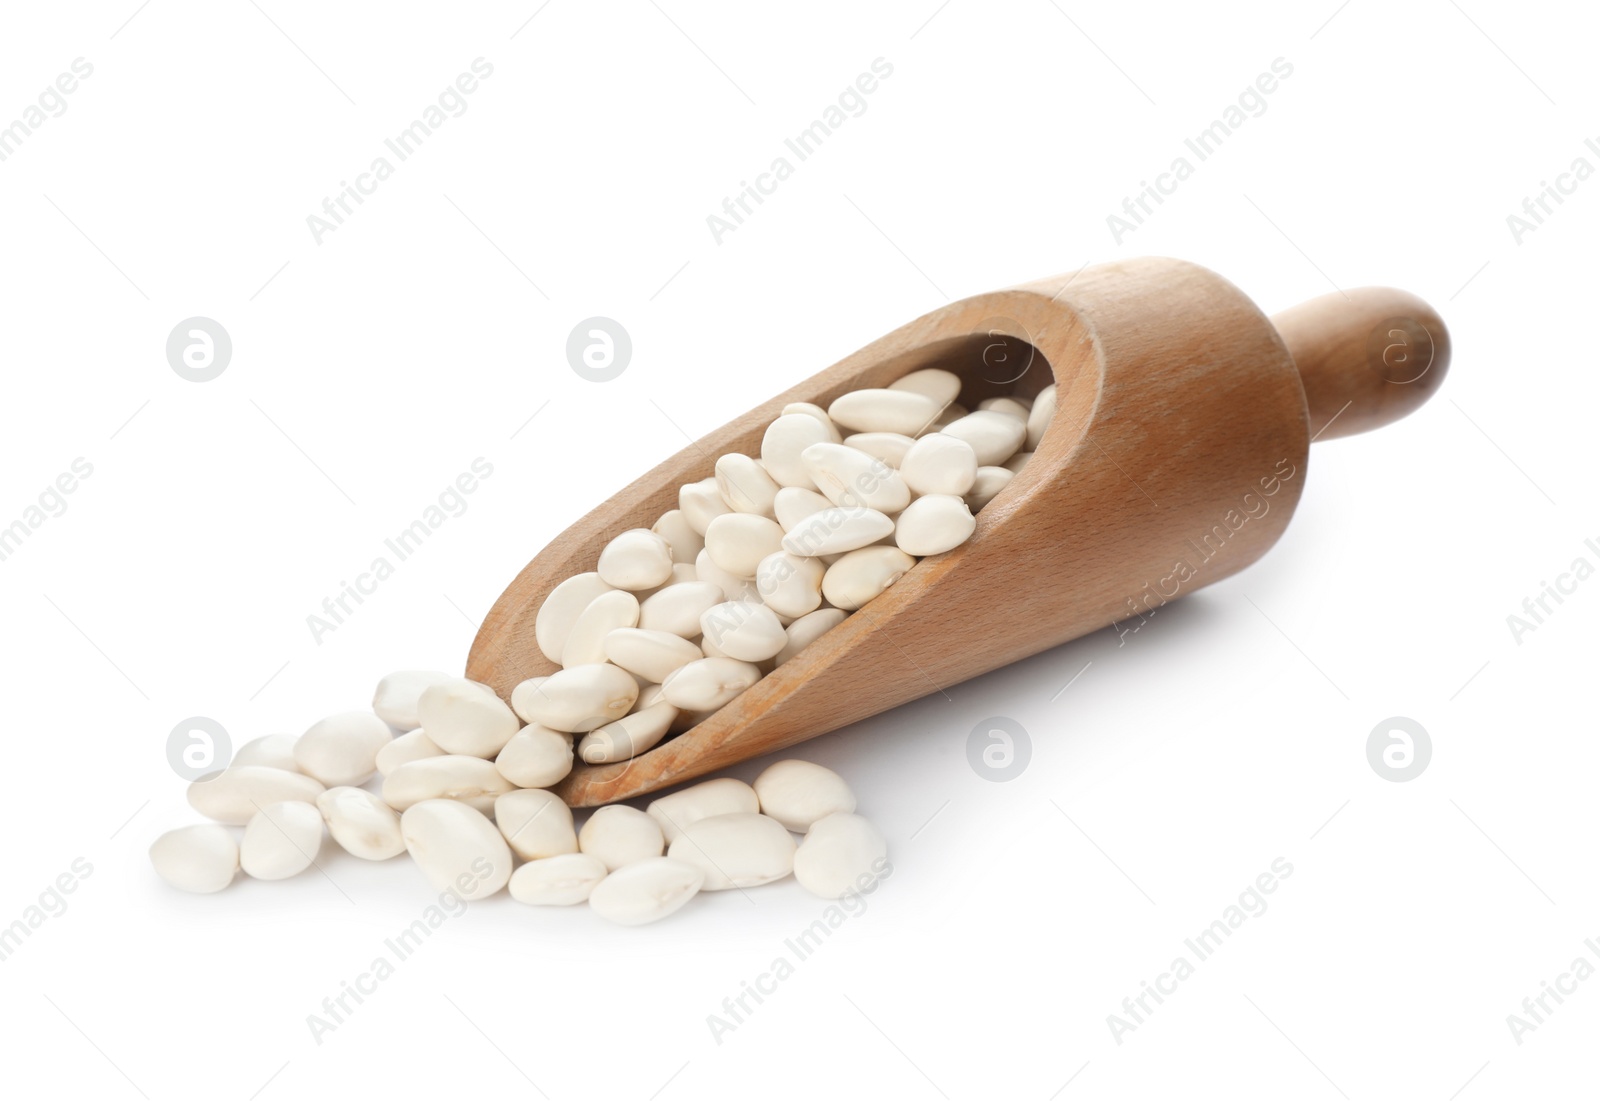 Photo of Wooden scoop with raw kidney beans on white background